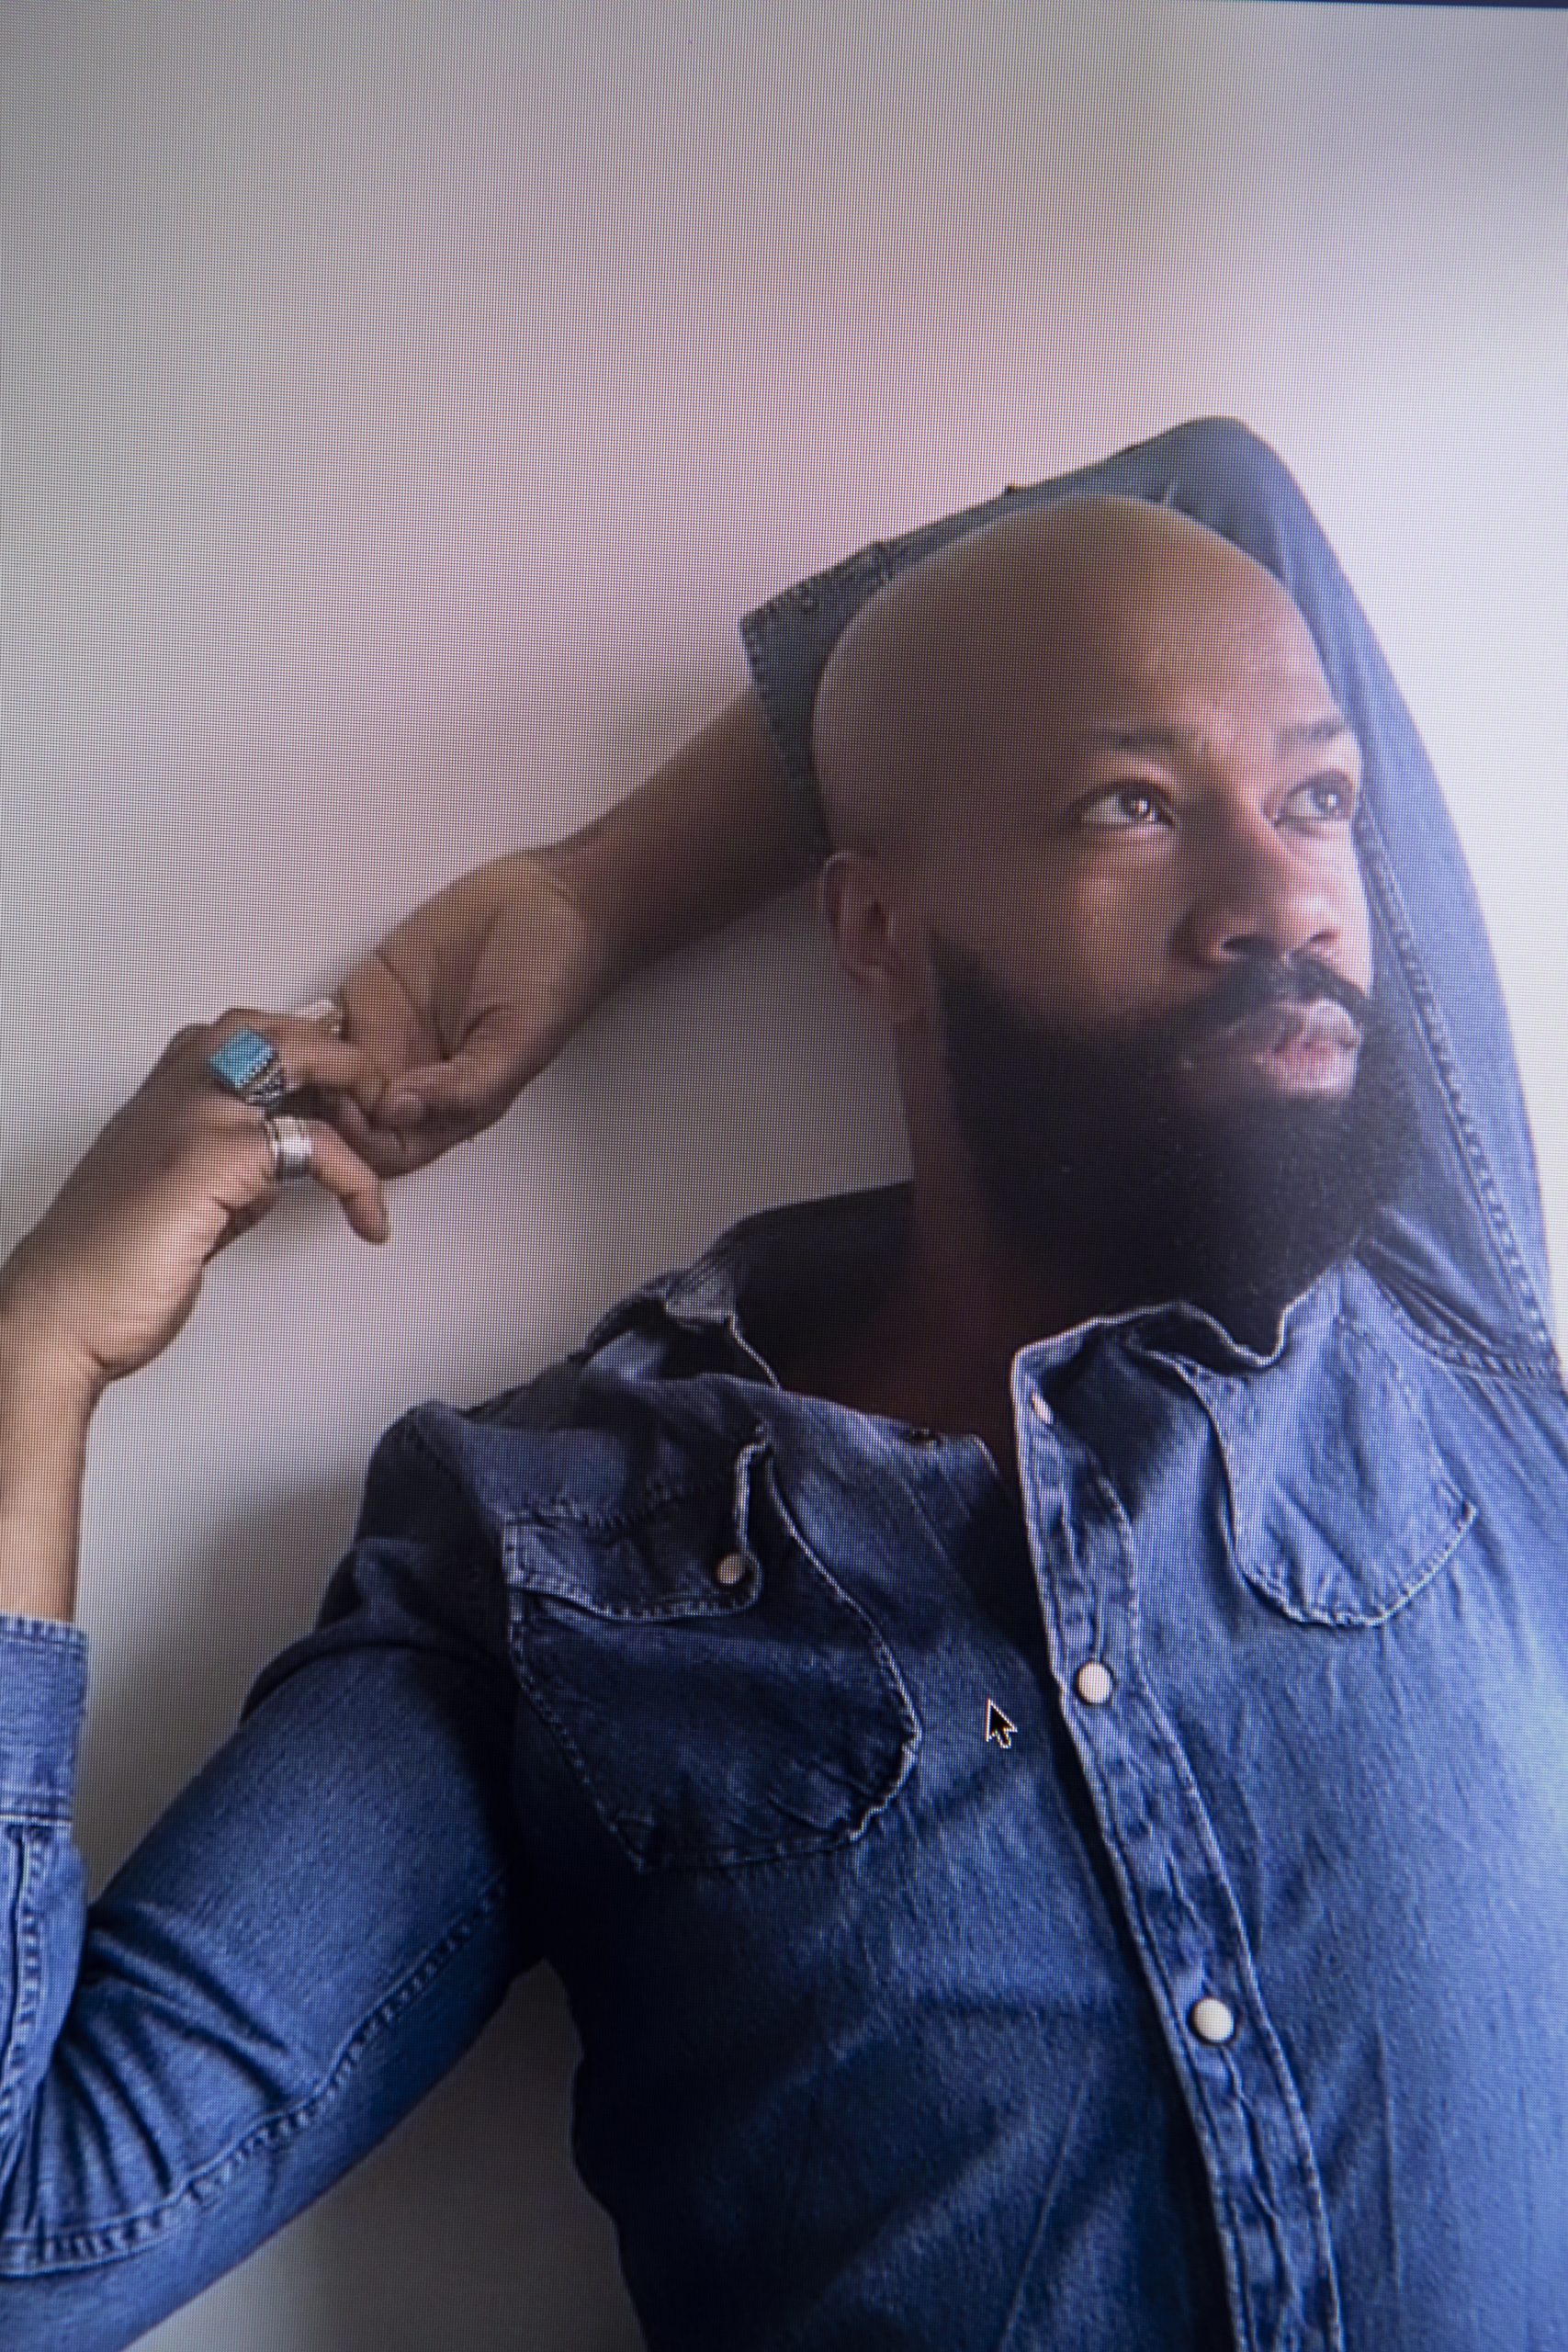 Gerrard Martin is a black man with a full beard. He is visible from the chest up and is wearing a denim blue shirt. He looks into the top right of the screen, beyond the image's frame and his arms are wrapped behind his head with his hands clasped together to the left.